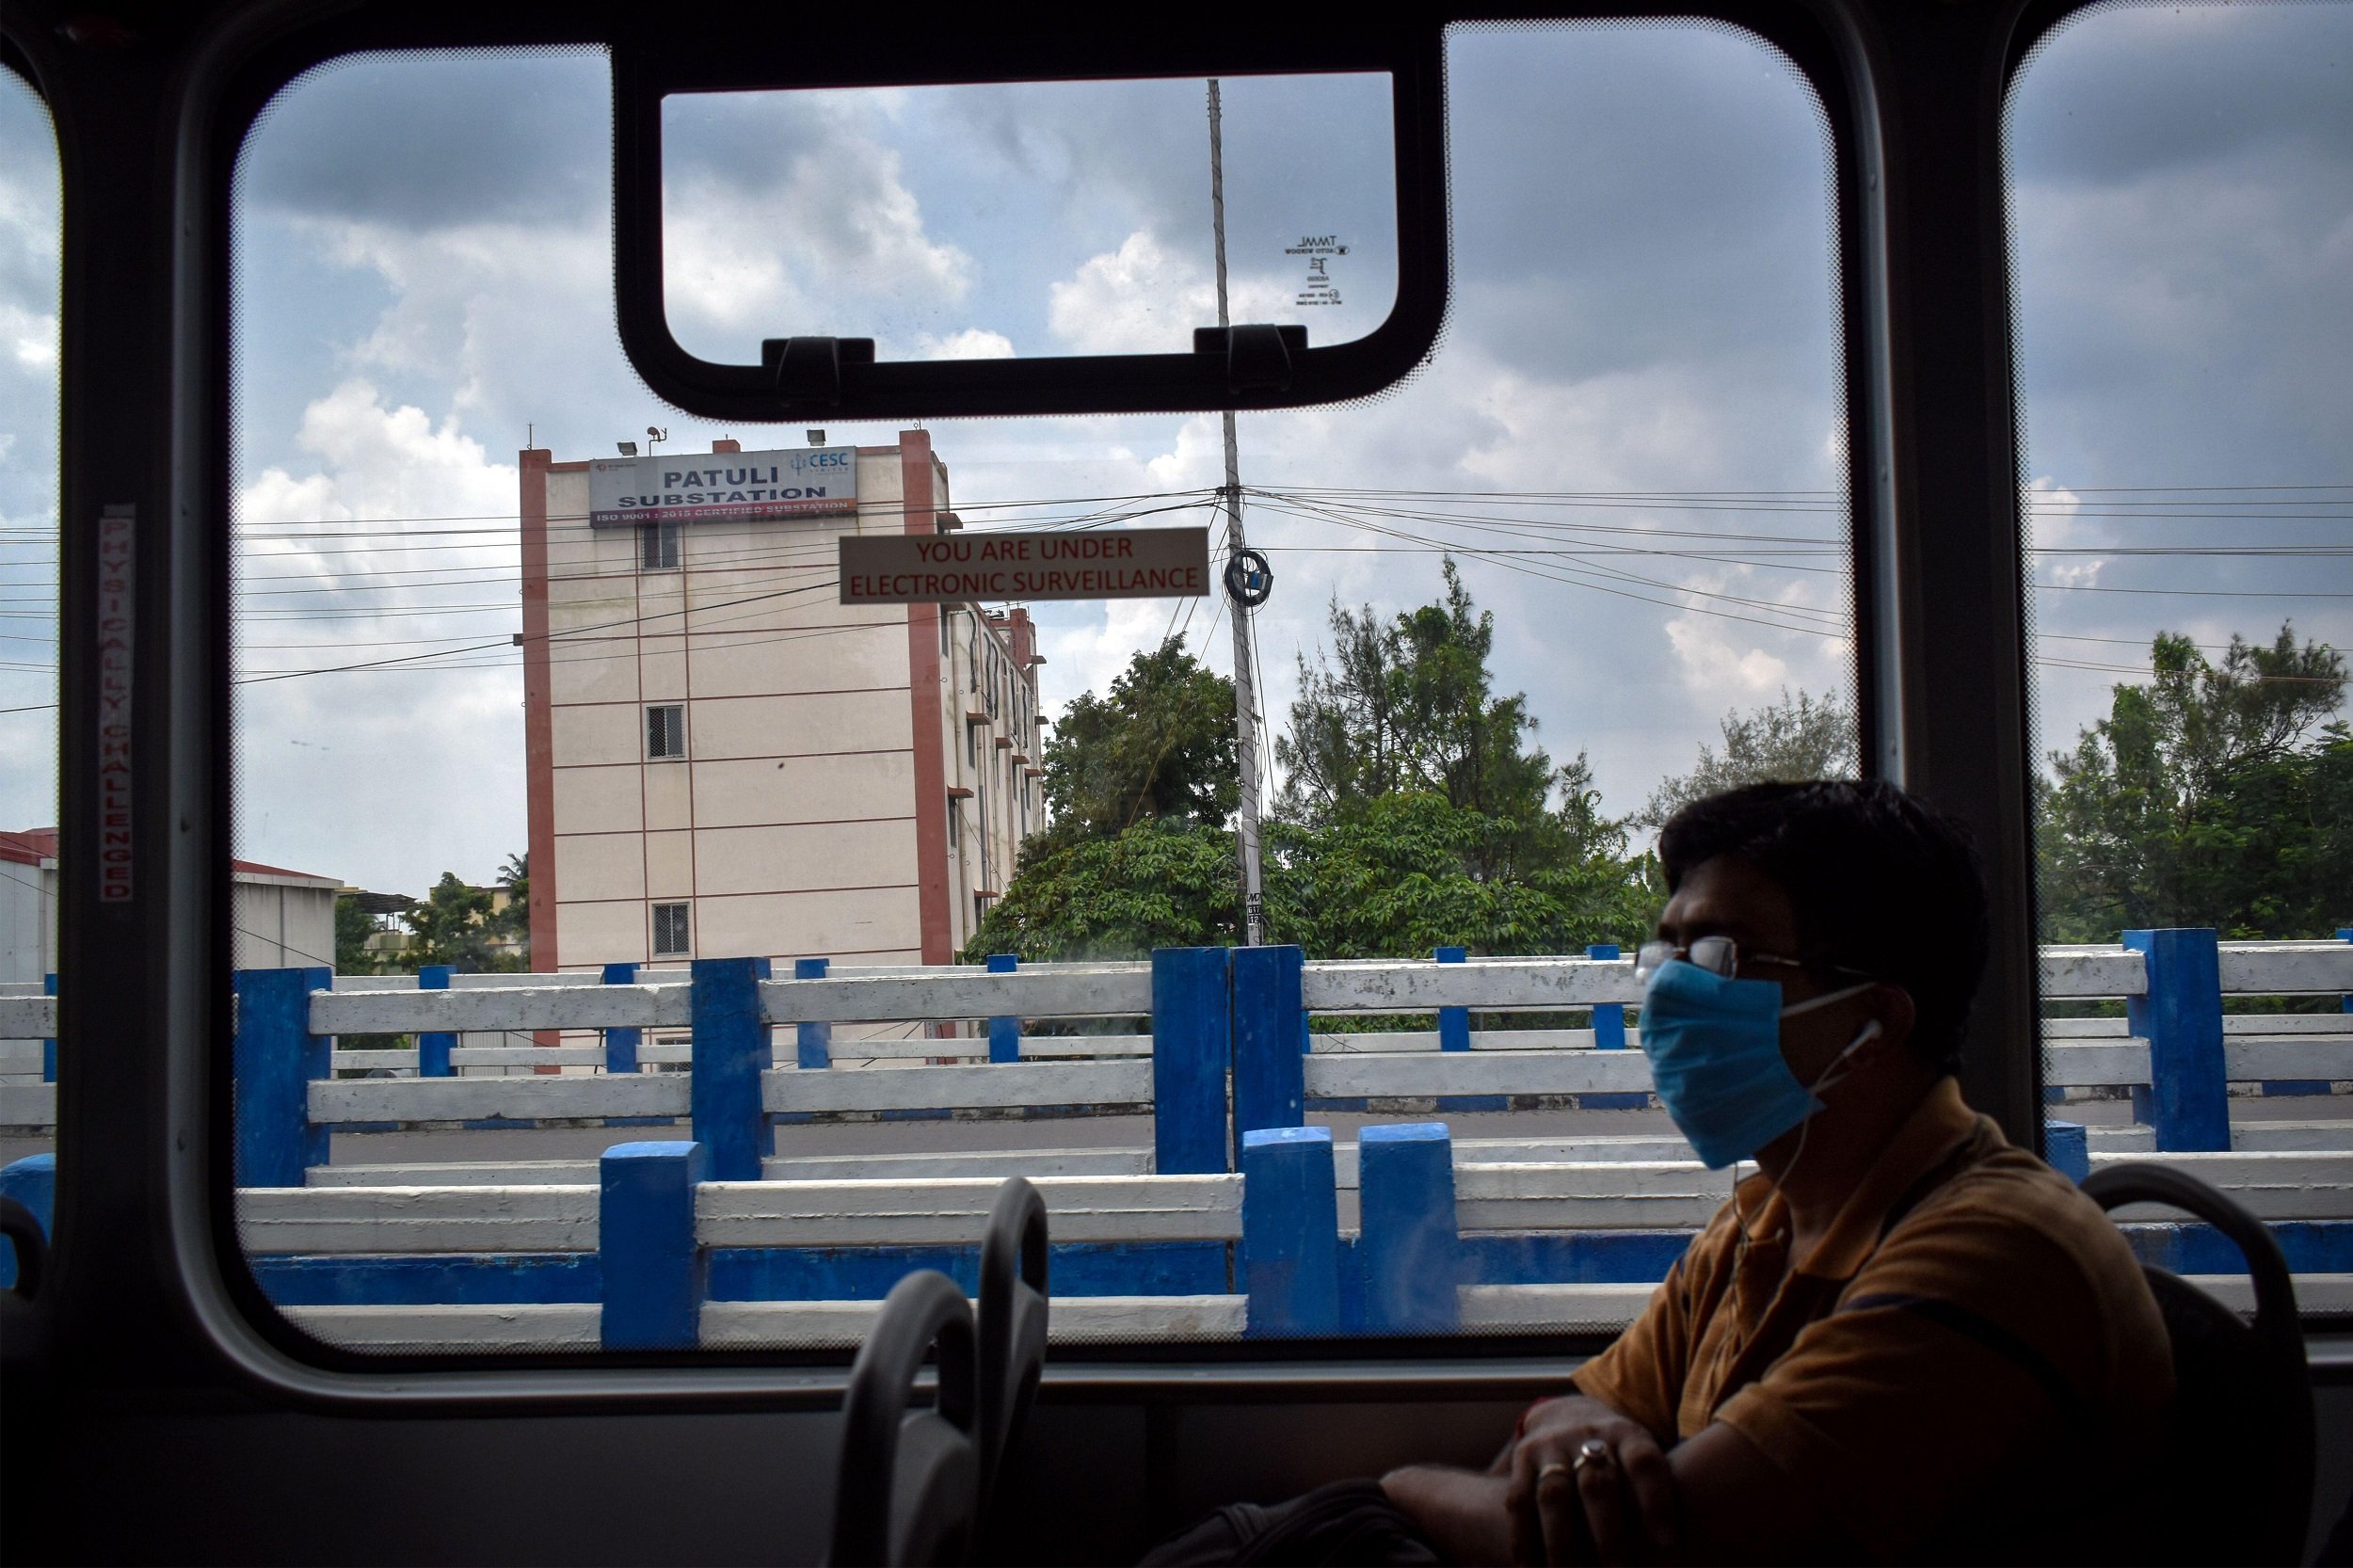 A man wearing a mask and travelling on an electric bus during the Covid-19 pandemic period in Kolkata [image: Sudipta Das / Pacific Press / Alamy Live News]